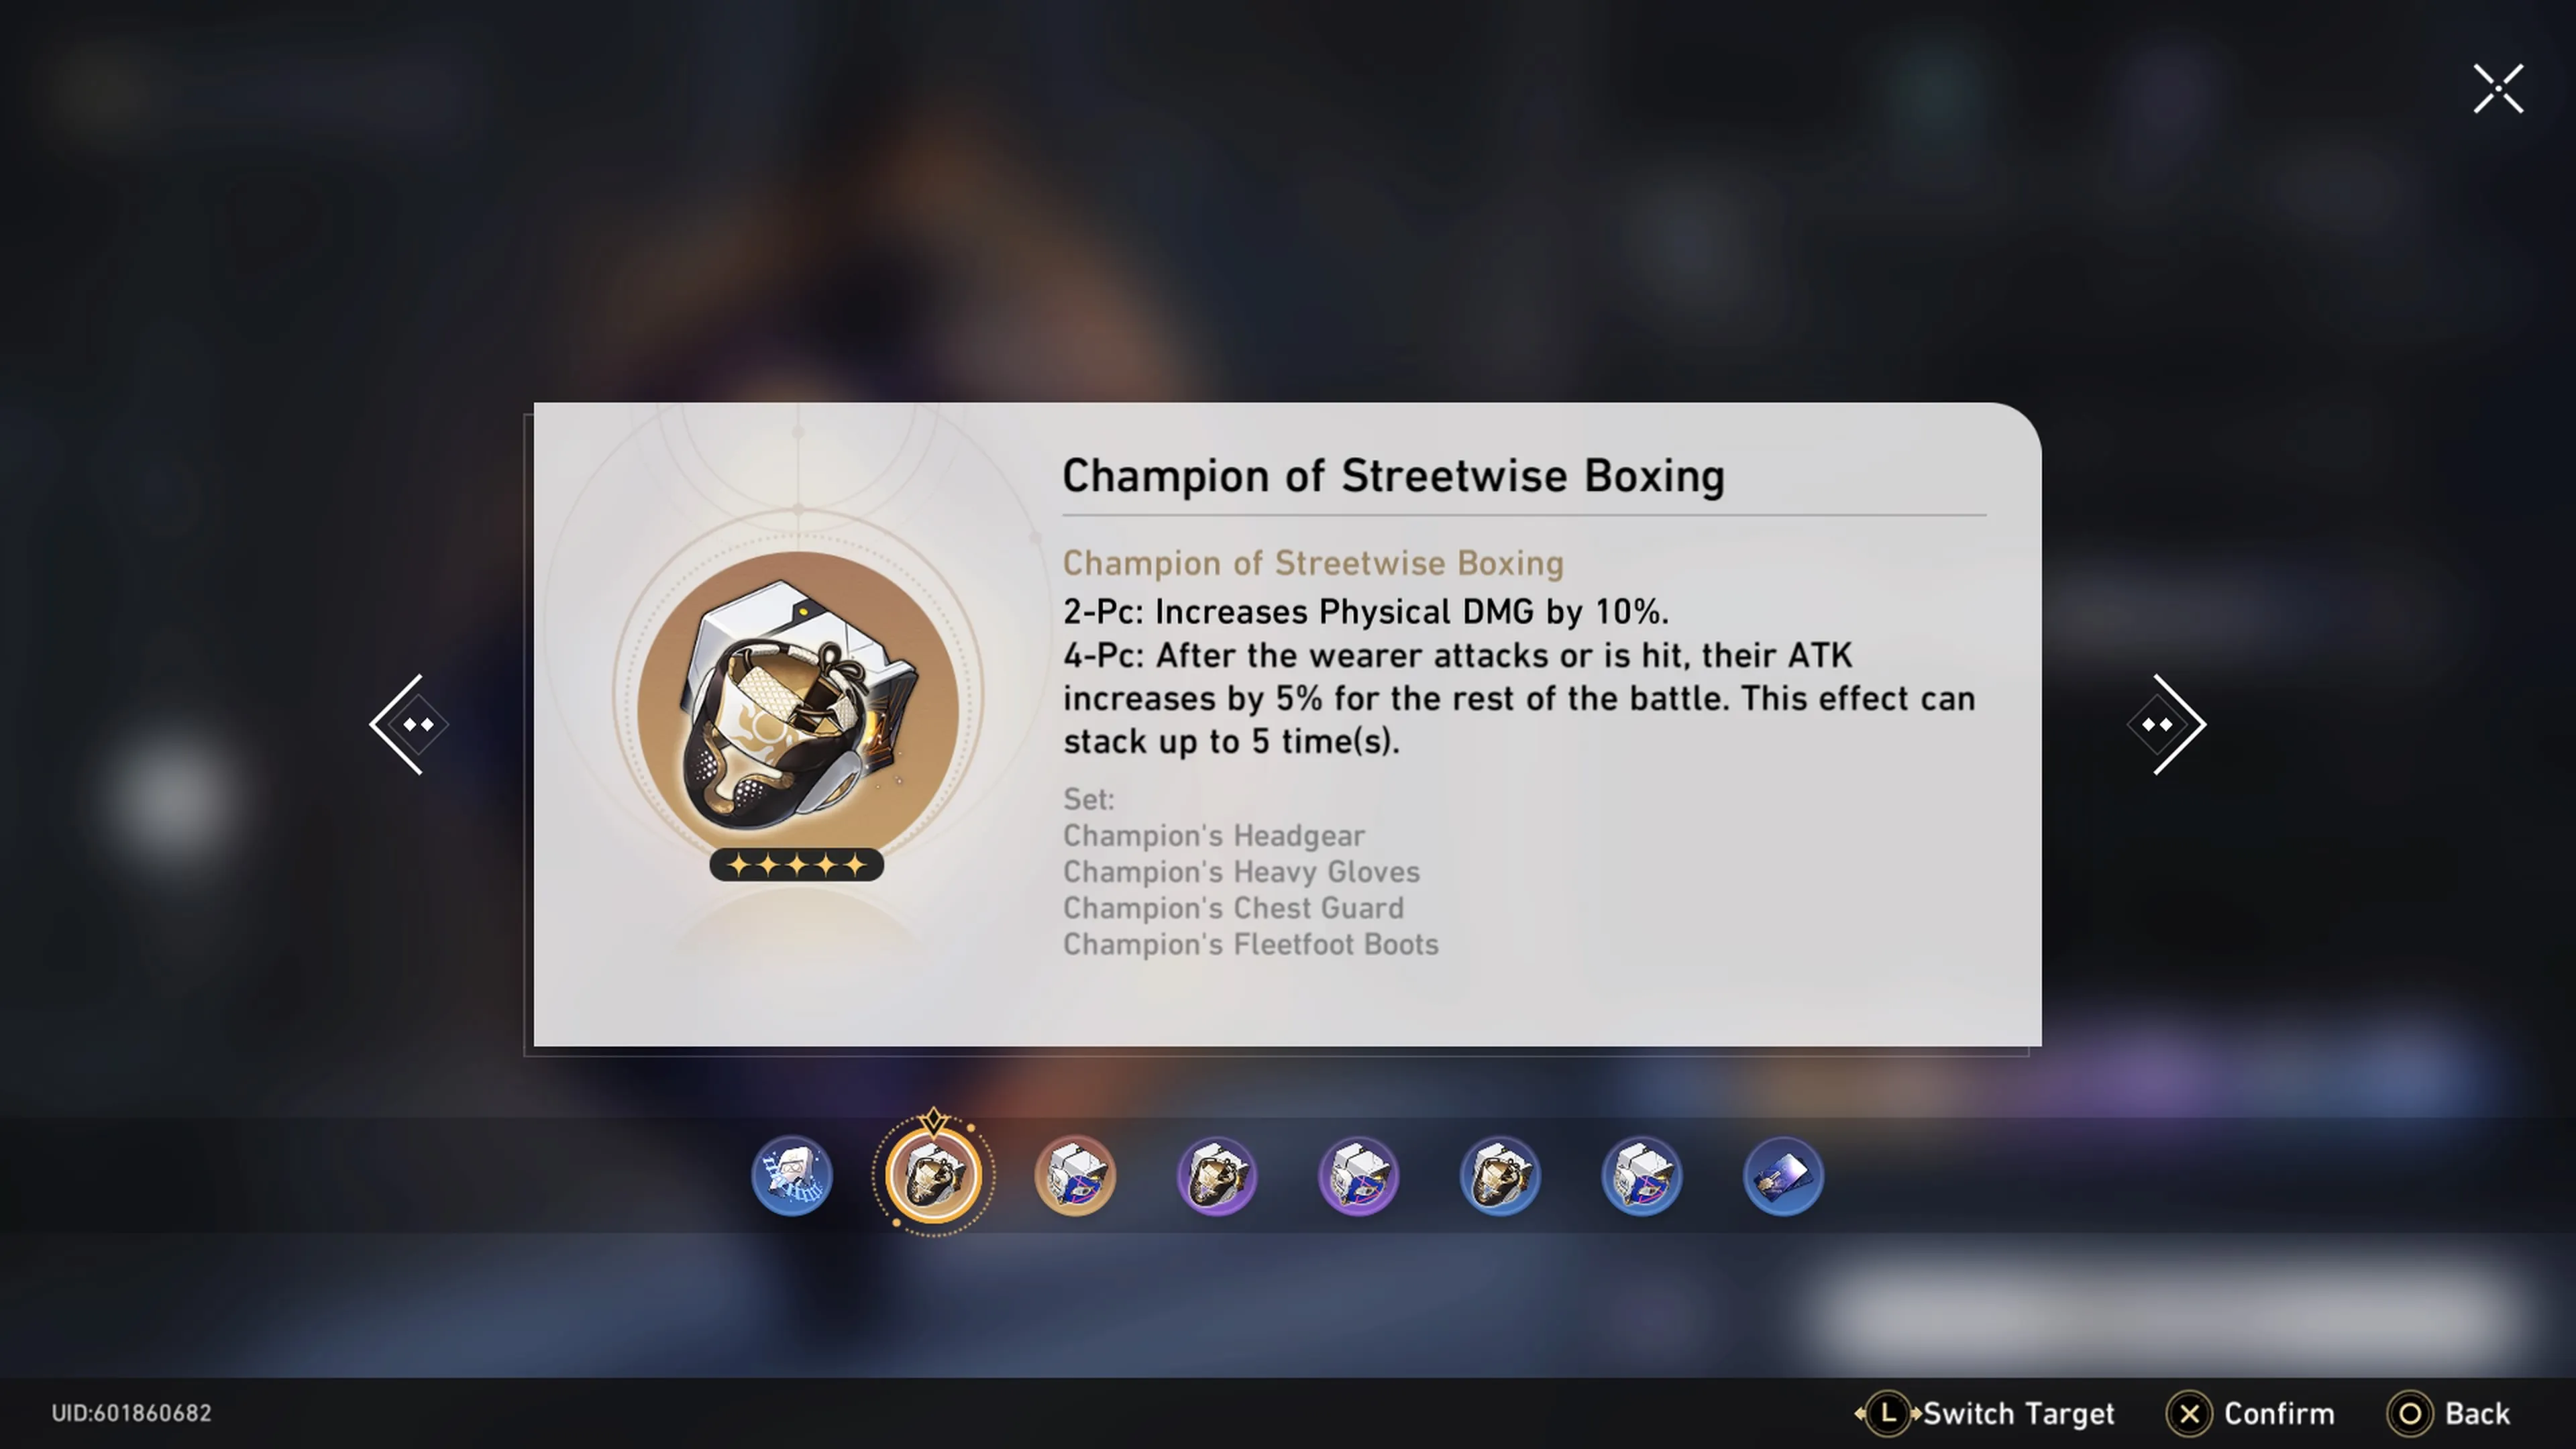 Champion of Streetwise Boxing